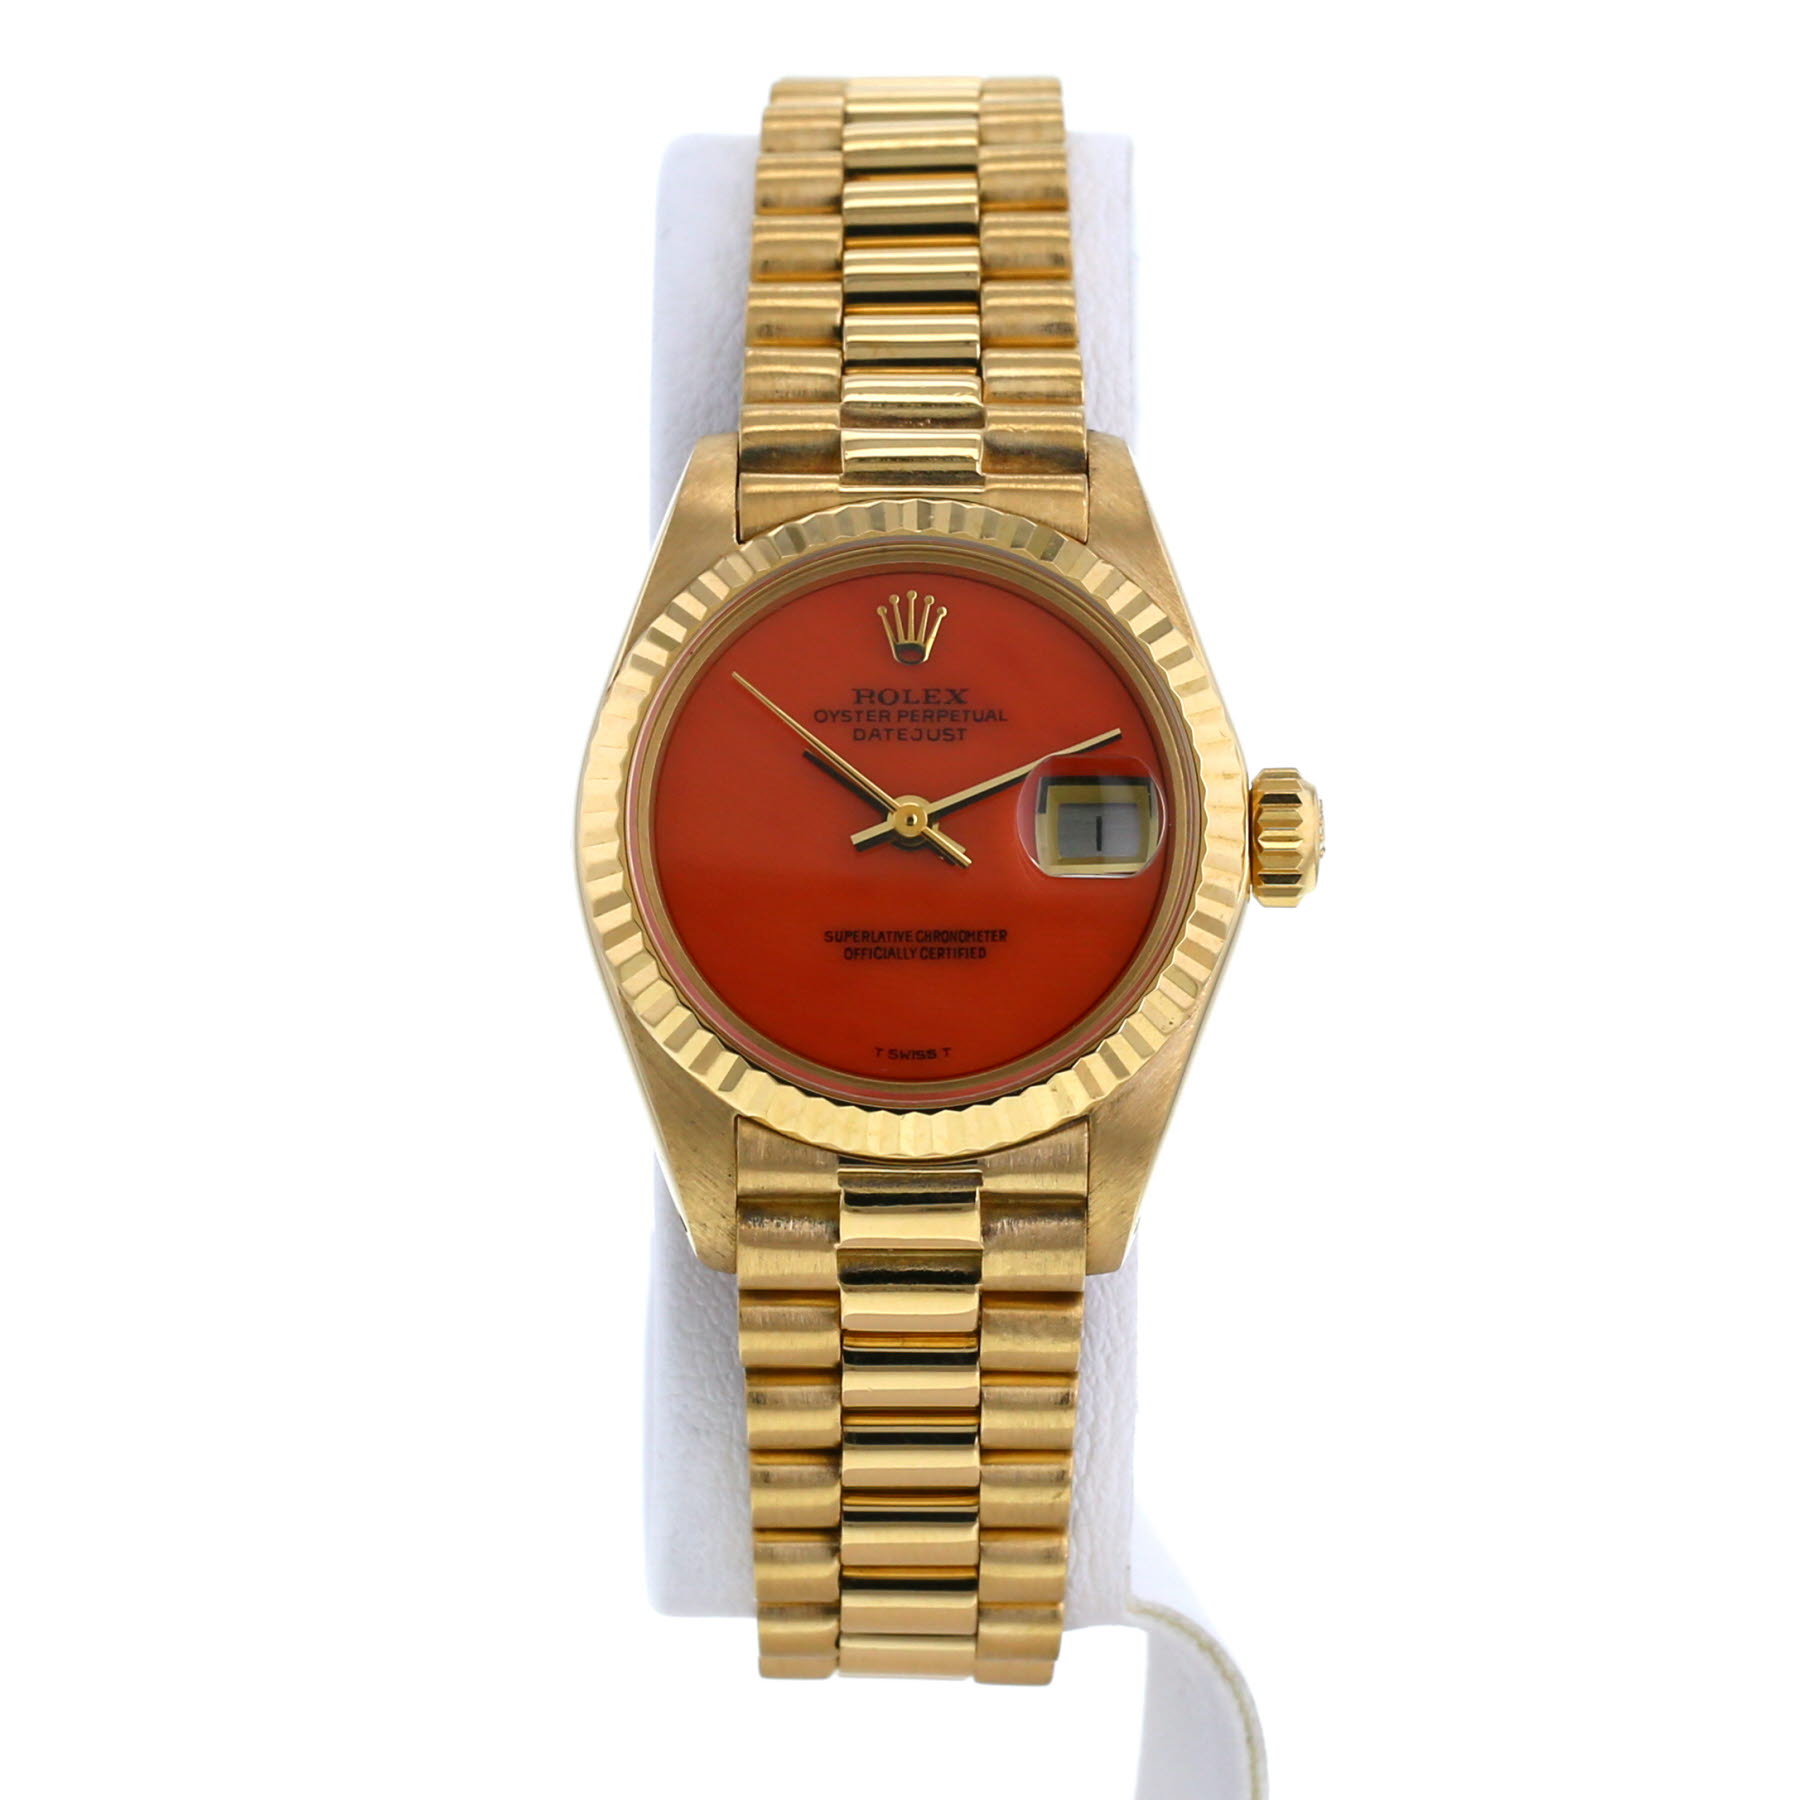 Datejust Lady In Yellow Ref: 6917 Circa 1978